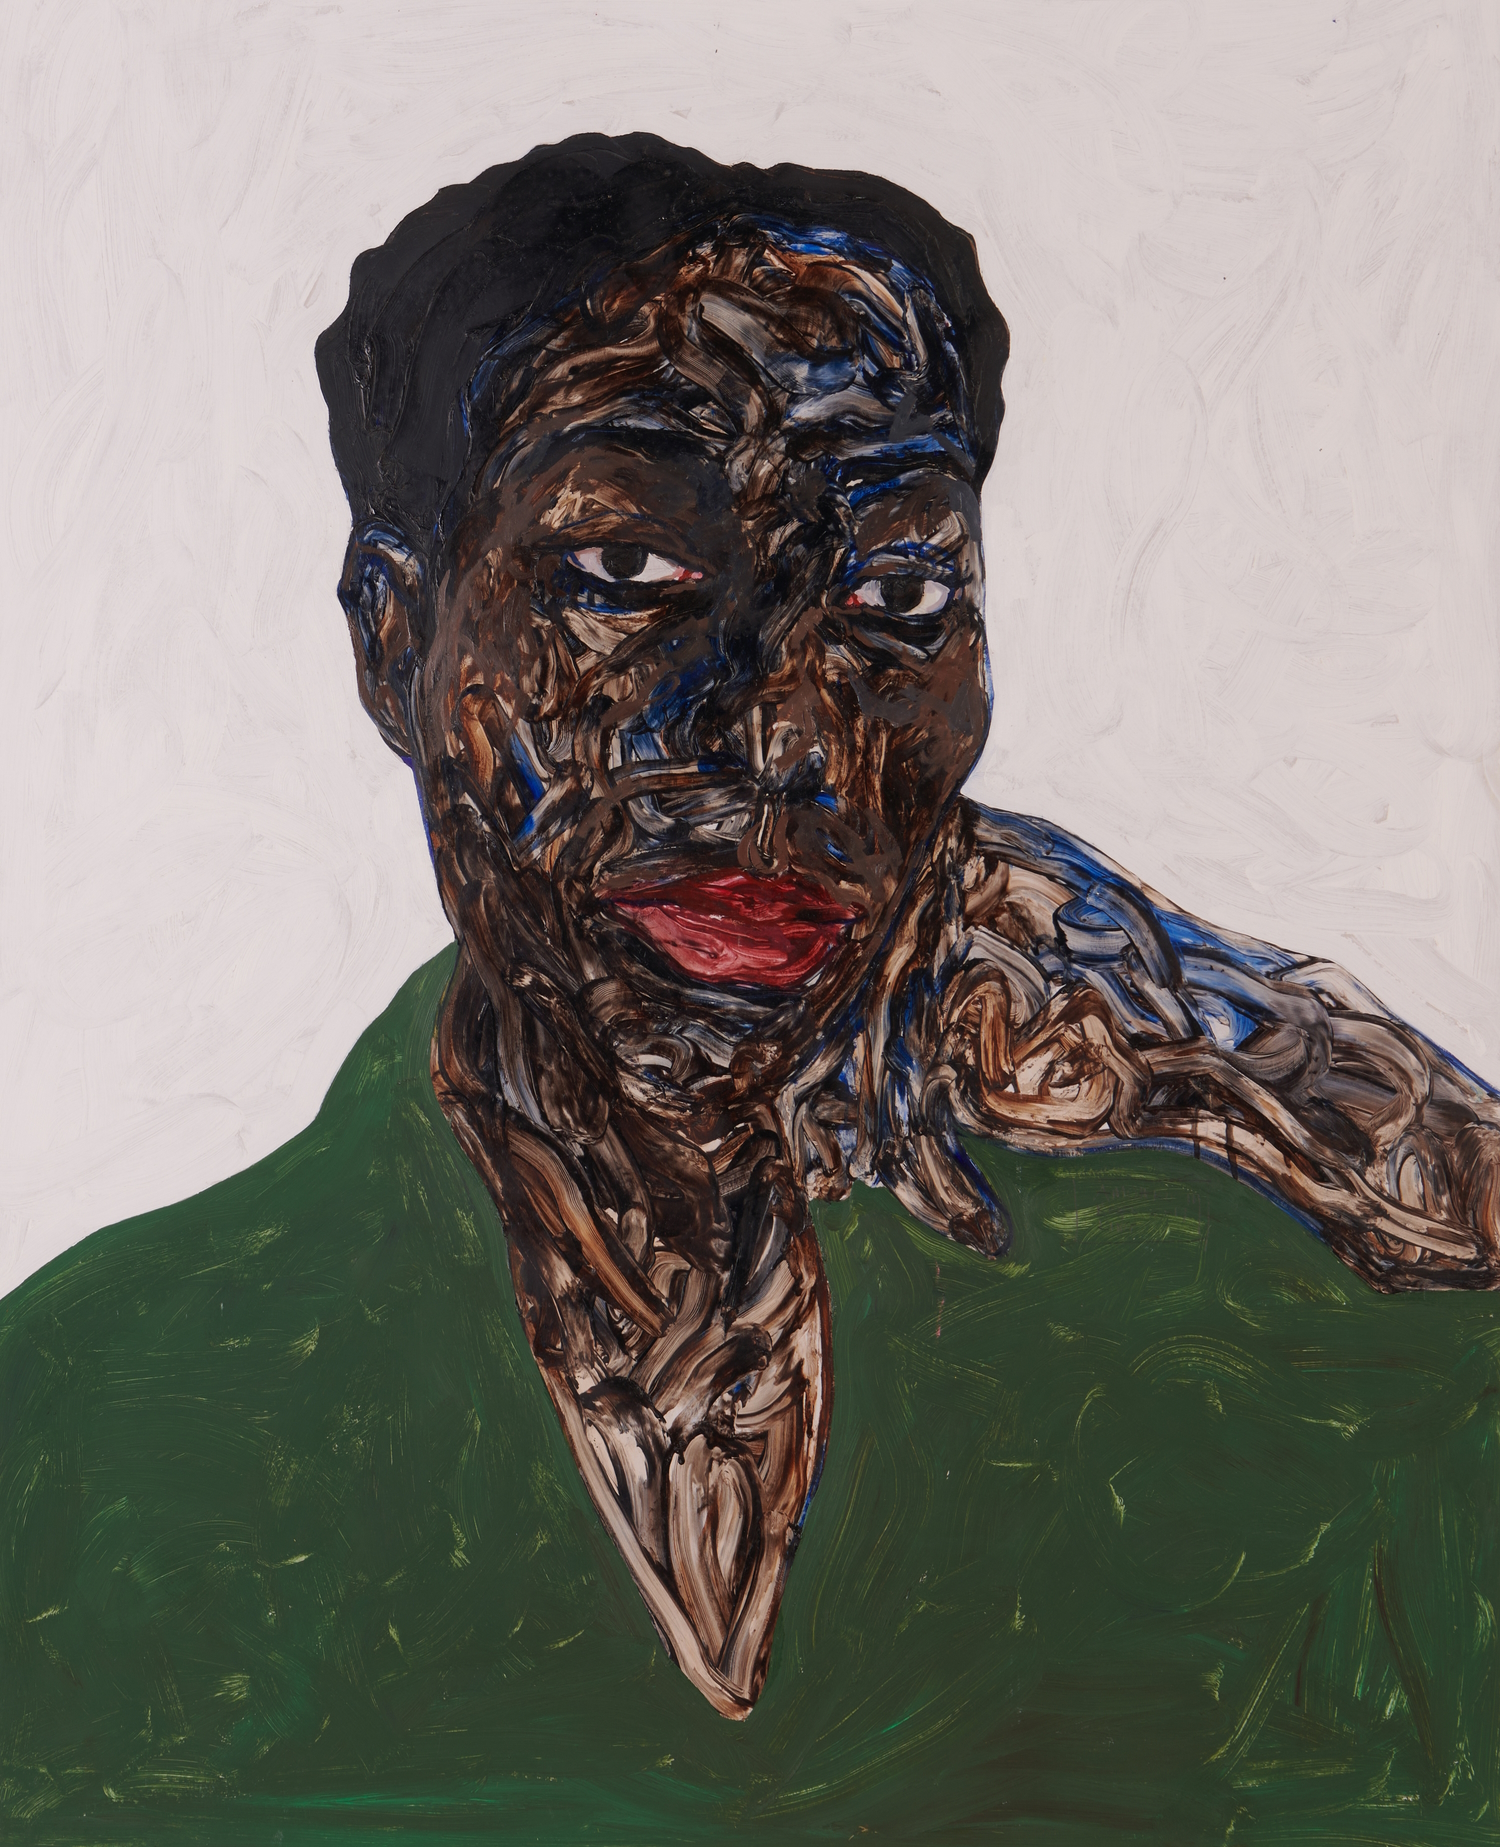 Amoako Boafo, Green Shirt, 2019. Oil on paper. On loan from The Scantland Collection